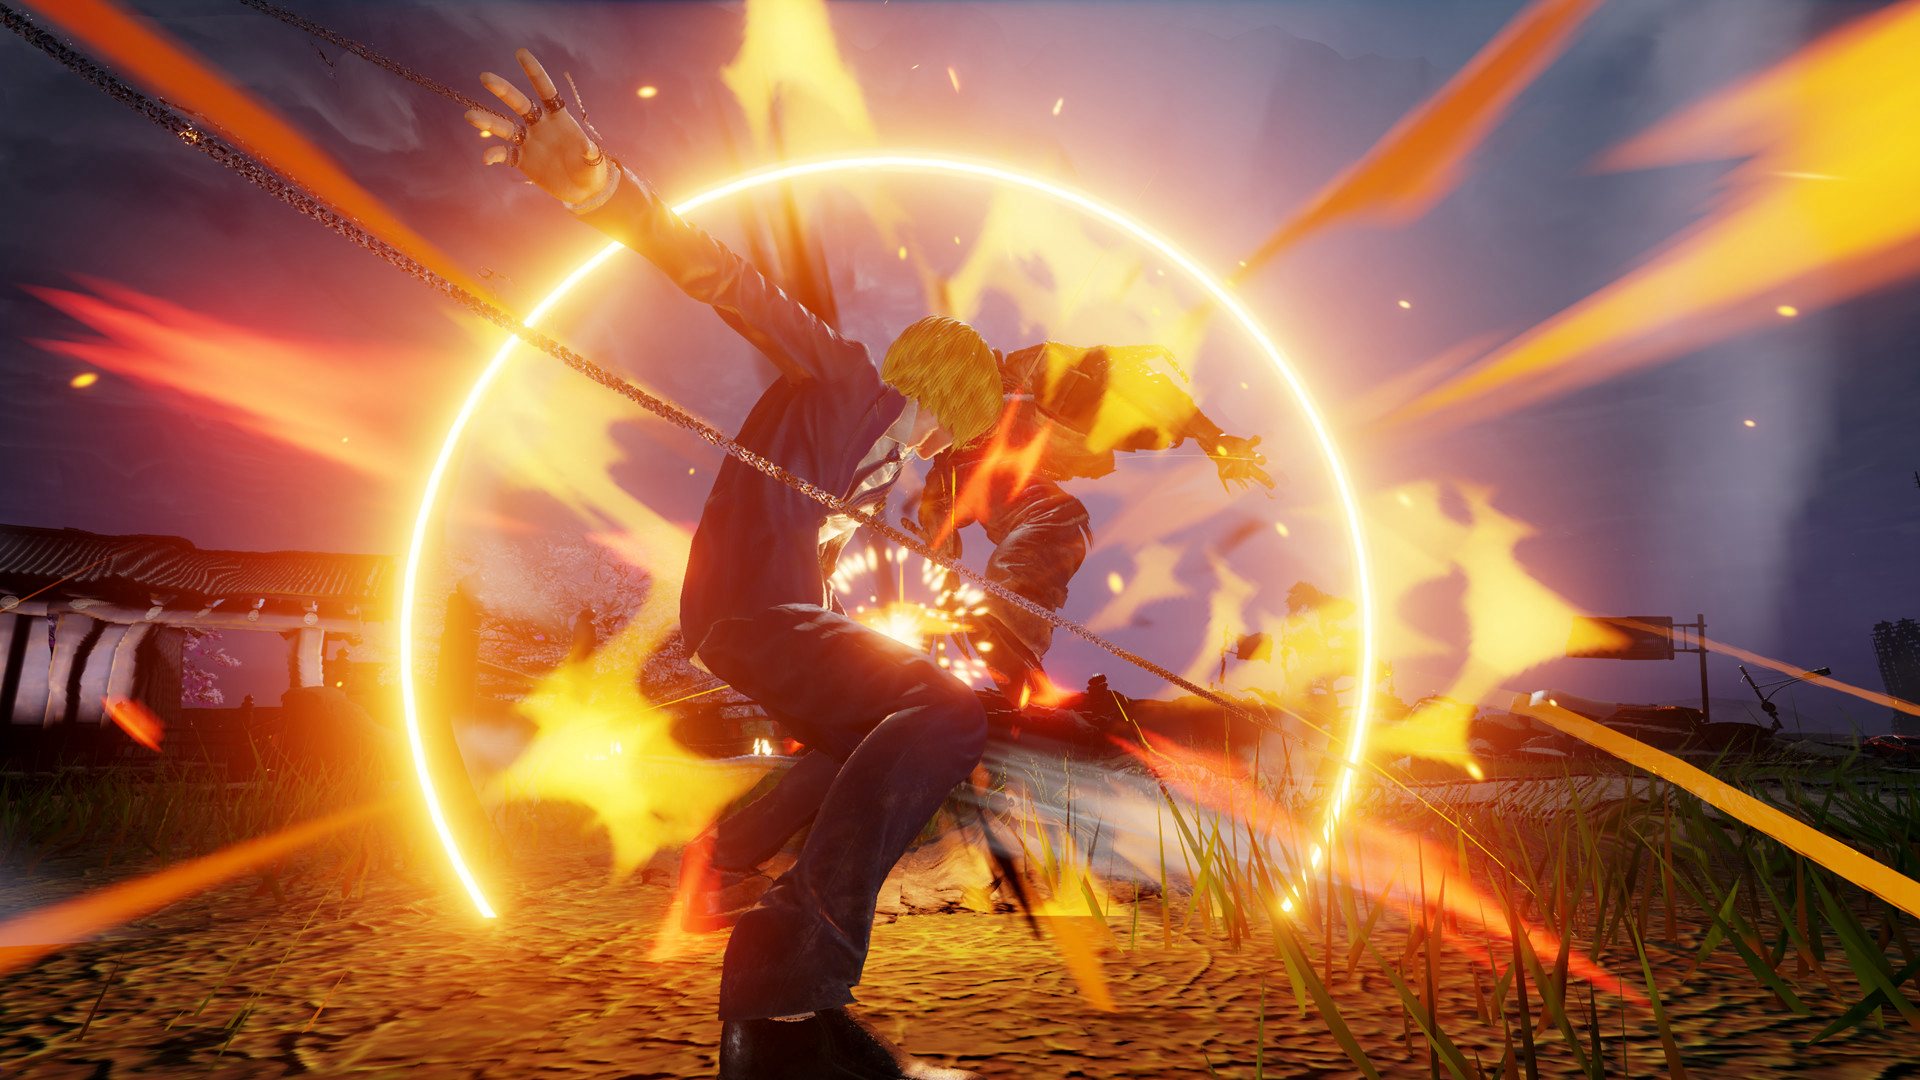 JUMP FORCE PlayStation 4 Account pixelpuffin.net Activation Link 22.59 $